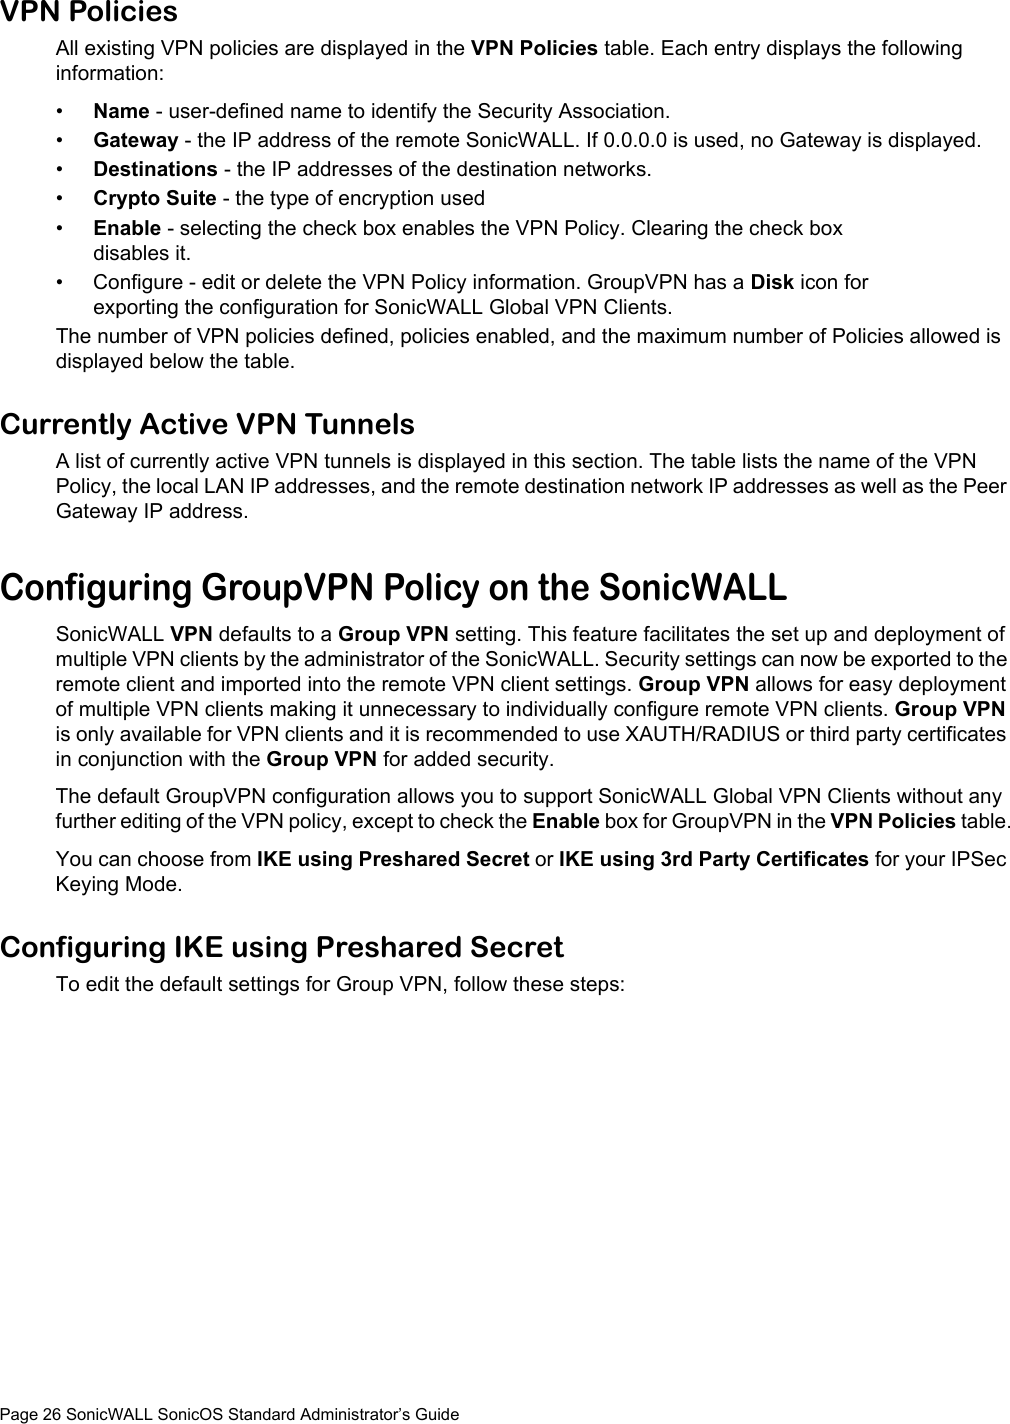 Page 26 SonicWALL SonicOS Standard Administrator’s GuideVPN Policies All existing VPN policies are displayed in the VPN Policies table. Each entry displays the following information:•Name - user-defined name to identify the Security Association.•Gateway - the IP address of the remote SonicWALL. If 0.0.0.0 is used, no Gateway is displayed. •Destinations - the IP addresses of the destination networks.•Crypto Suite - the type of encryption used•Enable - selecting the check box enables the VPN Policy. Clearing the check box disables it.• Configure - edit or delete the VPN Policy information. GroupVPN has a Disk icon for exporting the configuration for SonicWALL Global VPN Clients.The number of VPN policies defined, policies enabled, and the maximum number of Policies allowed is displayed below the table.Currently Active VPN TunnelsA list of currently active VPN tunnels is displayed in this section. The table lists the name of the VPN Policy, the local LAN IP addresses, and the remote destination network IP addresses as well as the Peer Gateway IP address. Configuring GroupVPN Policy on the SonicWALLSonicWALL VPN defaults to a Group VPN setting. This feature facilitates the set up and deployment of multiple VPN clients by the administrator of the SonicWALL. Security settings can now be exported to the remote client and imported into the remote VPN client settings. Group VPN allows for easy deployment of multiple VPN clients making it unnecessary to individually configure remote VPN clients. Group VPN is only available for VPN clients and it is recommended to use XAUTH/RADIUS or third party certificates in conjunction with the Group VPN for added security.The default GroupVPN configuration allows you to support SonicWALL Global VPN Clients without any further editing of the VPN policy, except to check the Enable box for GroupVPN in the VPN Policies table.You can choose from IKE using Preshared Secret or IKE using 3rd Party Certificates for your IPSec Keying Mode.Configuring IKE using Preshared SecretTo edit the default settings for Group VPN, follow these steps: